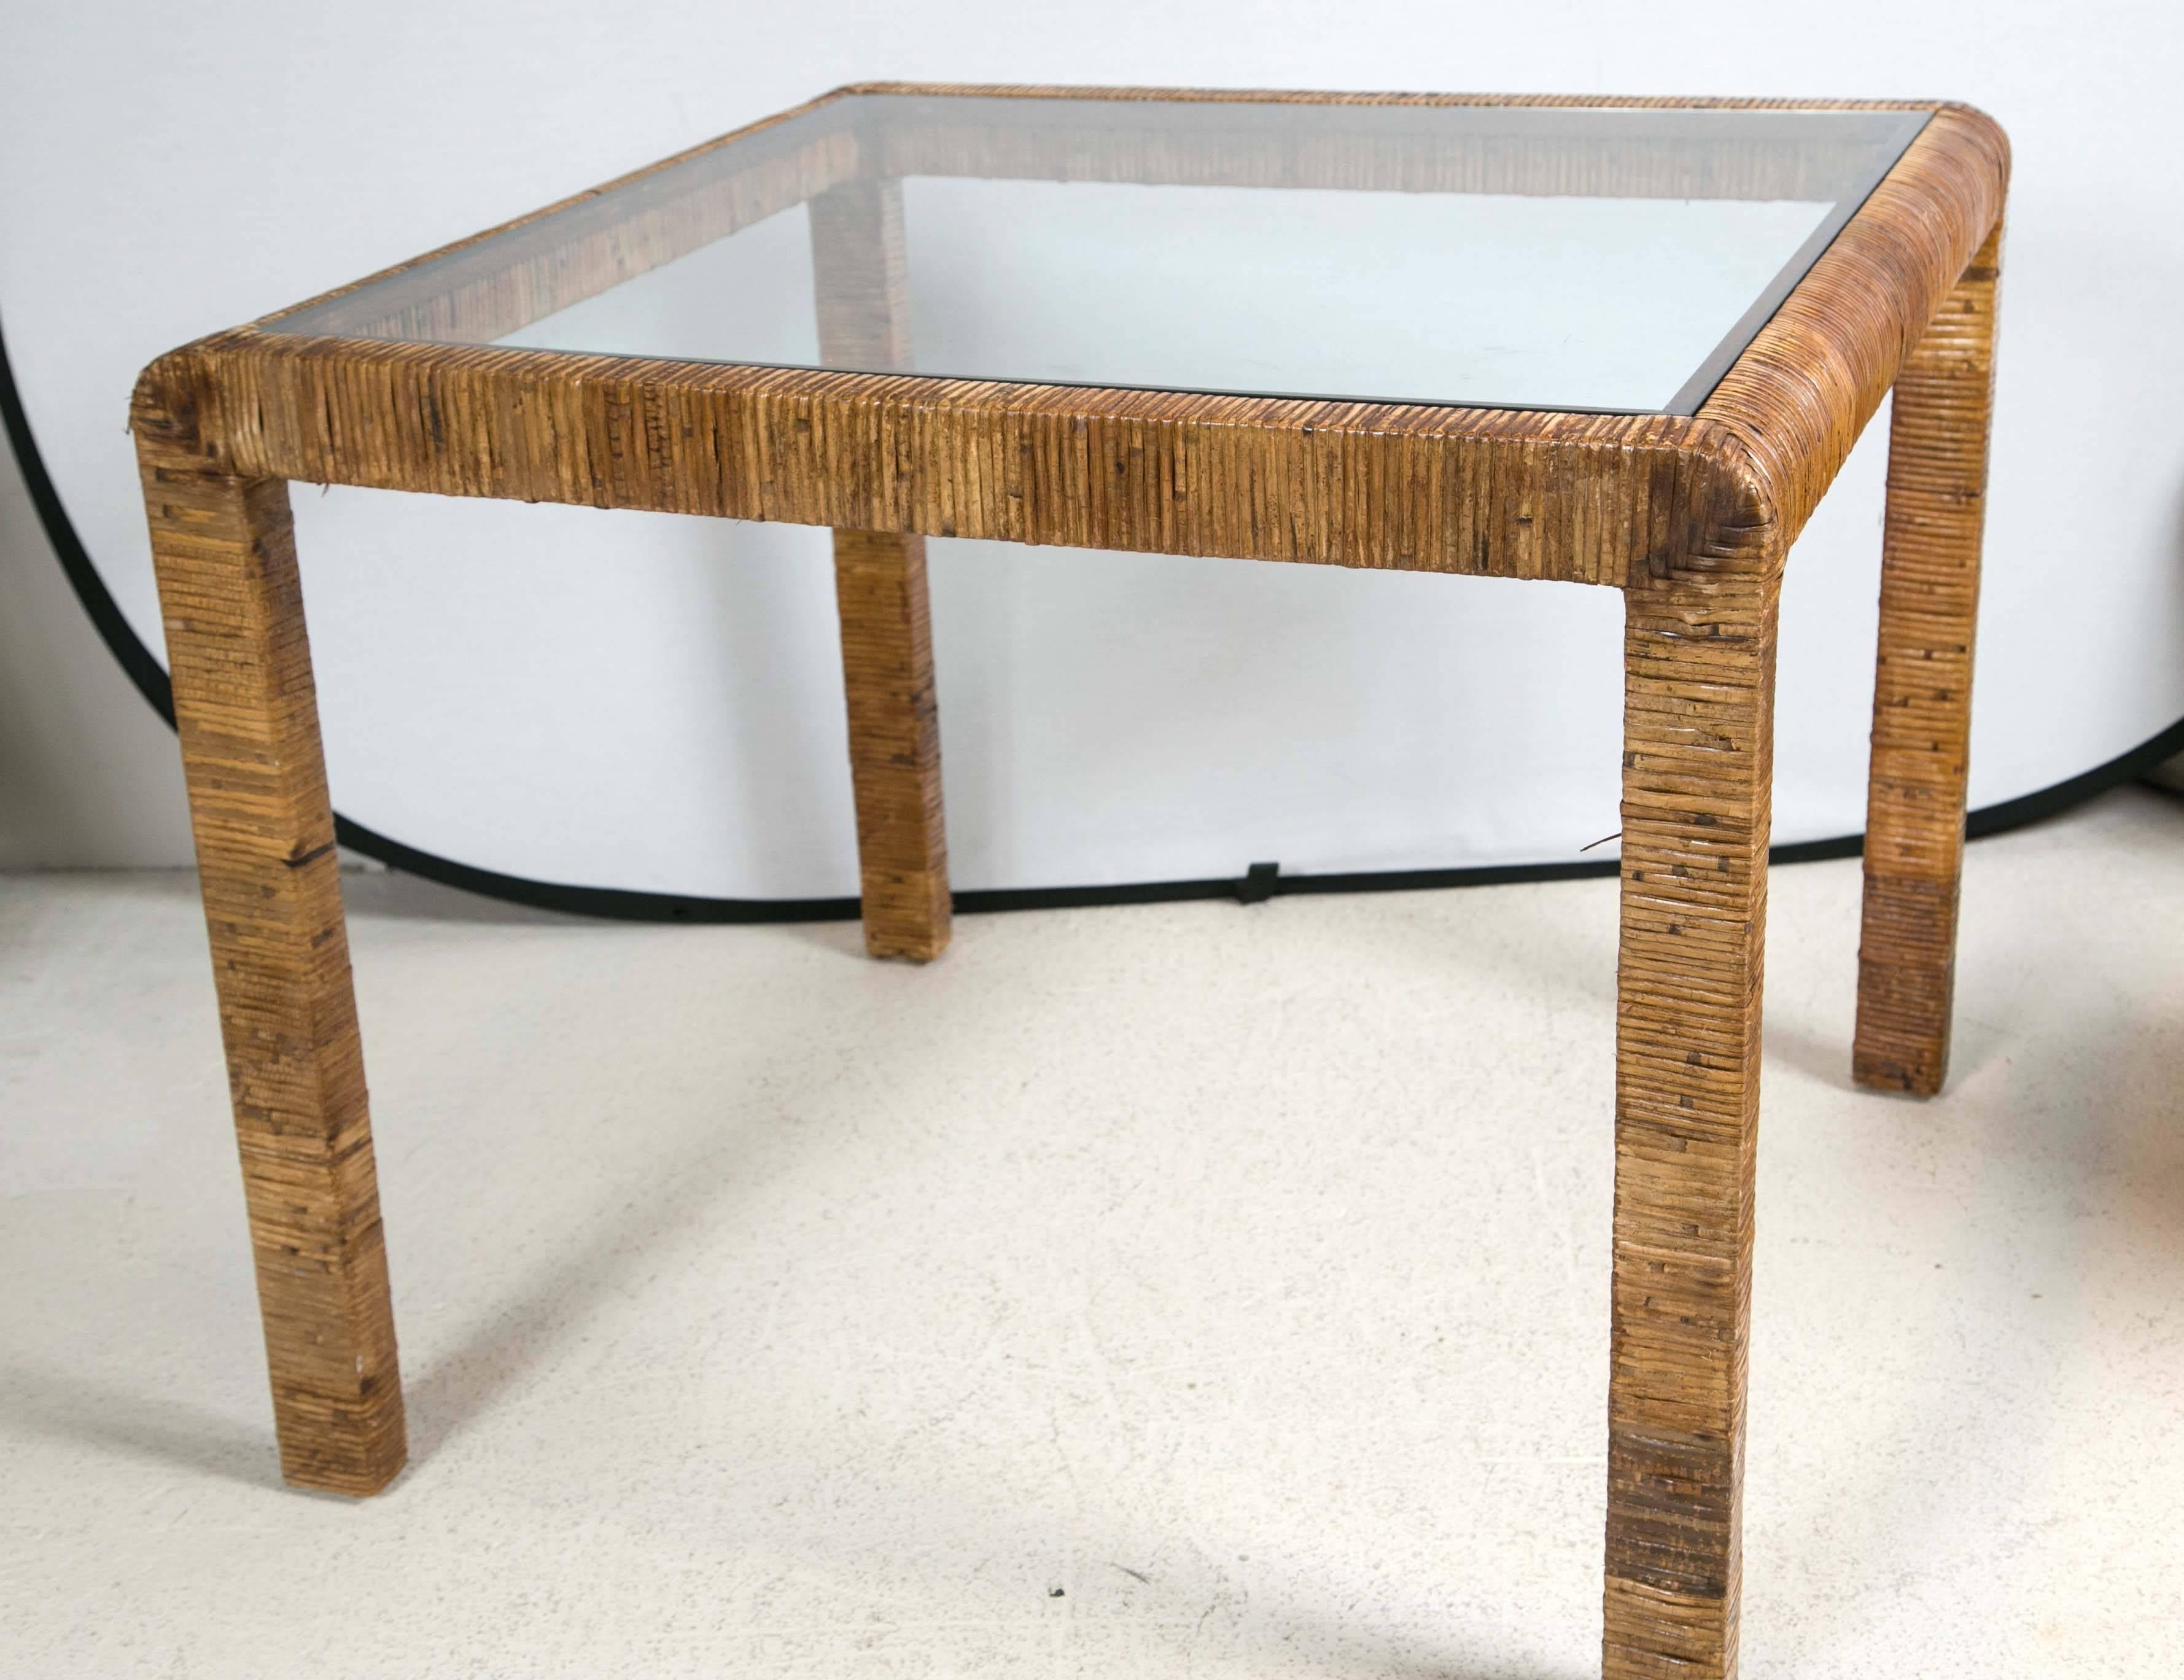 Rattan and glass card table with multicolor rattan on sides, with heavy glass inlaid top.